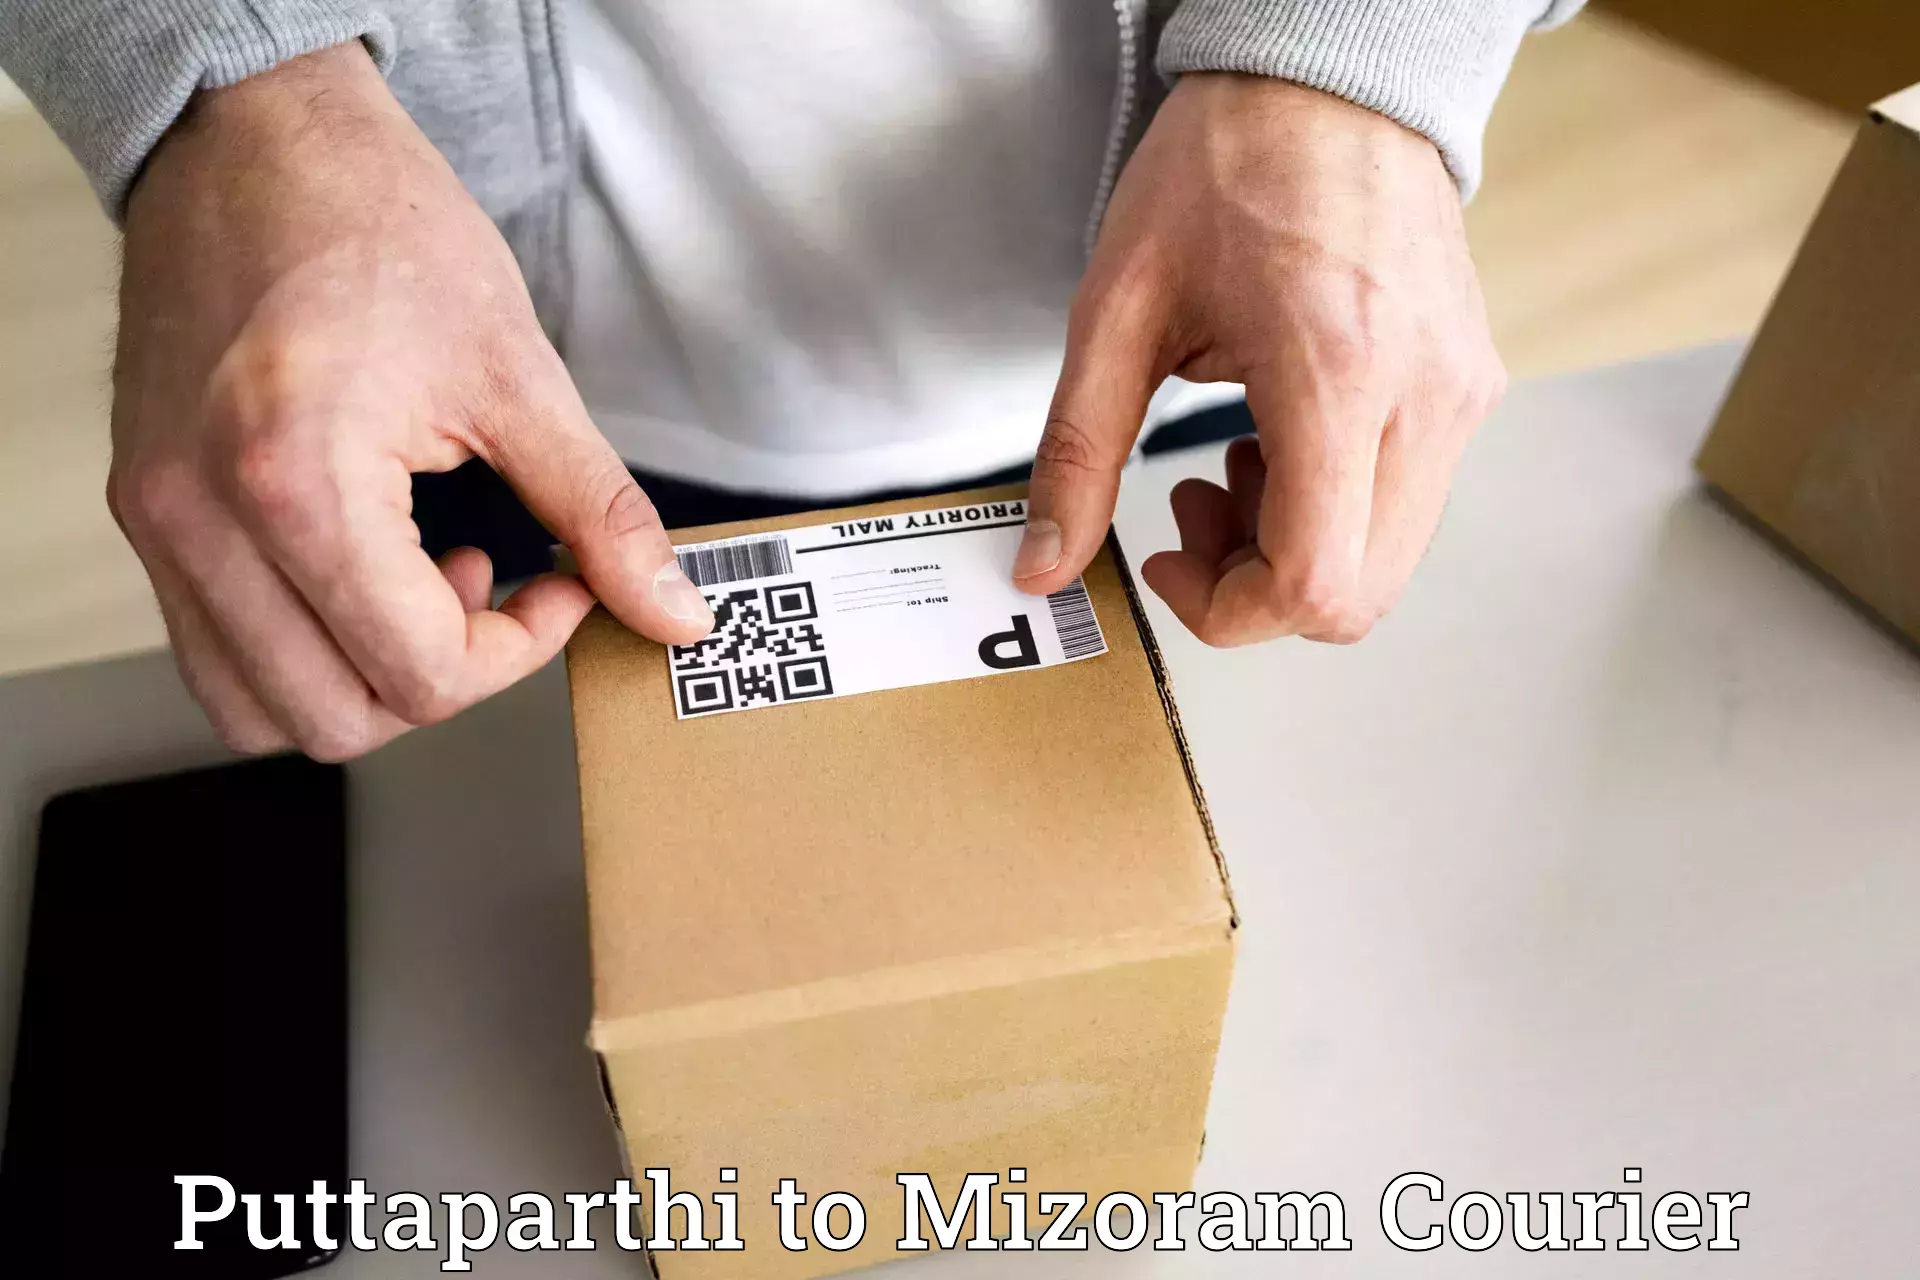 State-of-the-art courier technology Puttaparthi to Thenzawl